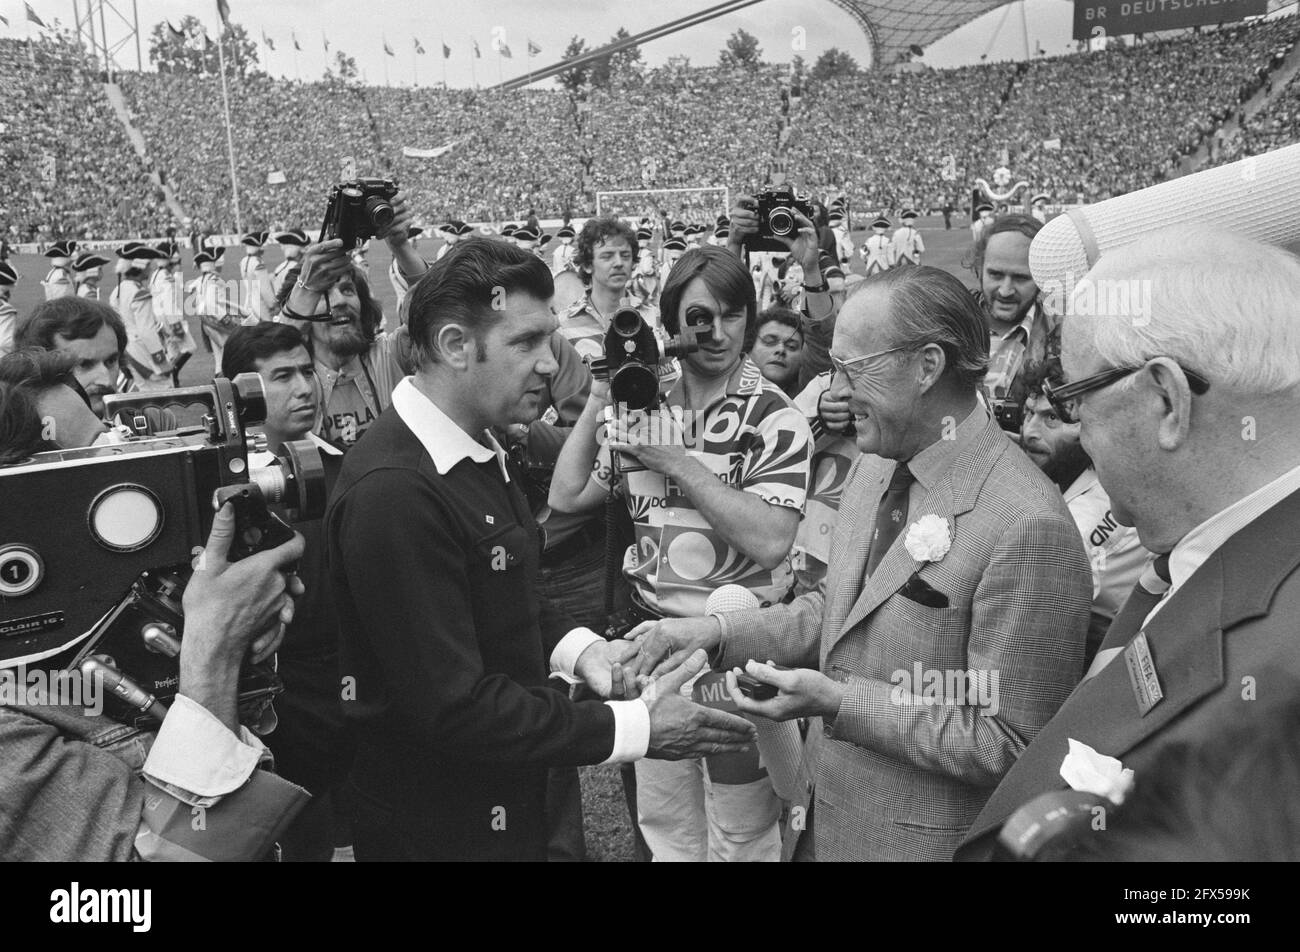 Final World Cup 1974 in Munich, West Germany v Netherlands 2-1; Prince Bernhard gives referee Jack Taylor World Wildlife Fund mascot, July 7, 1974, royal family, princes, referees, sports, soccer, The Netherlands, 20th century press agency photo, news to remember, documentary, historic photography 1945-1990, visual stories, human history of the Twentieth Century, capturing moments in time Stock Photo